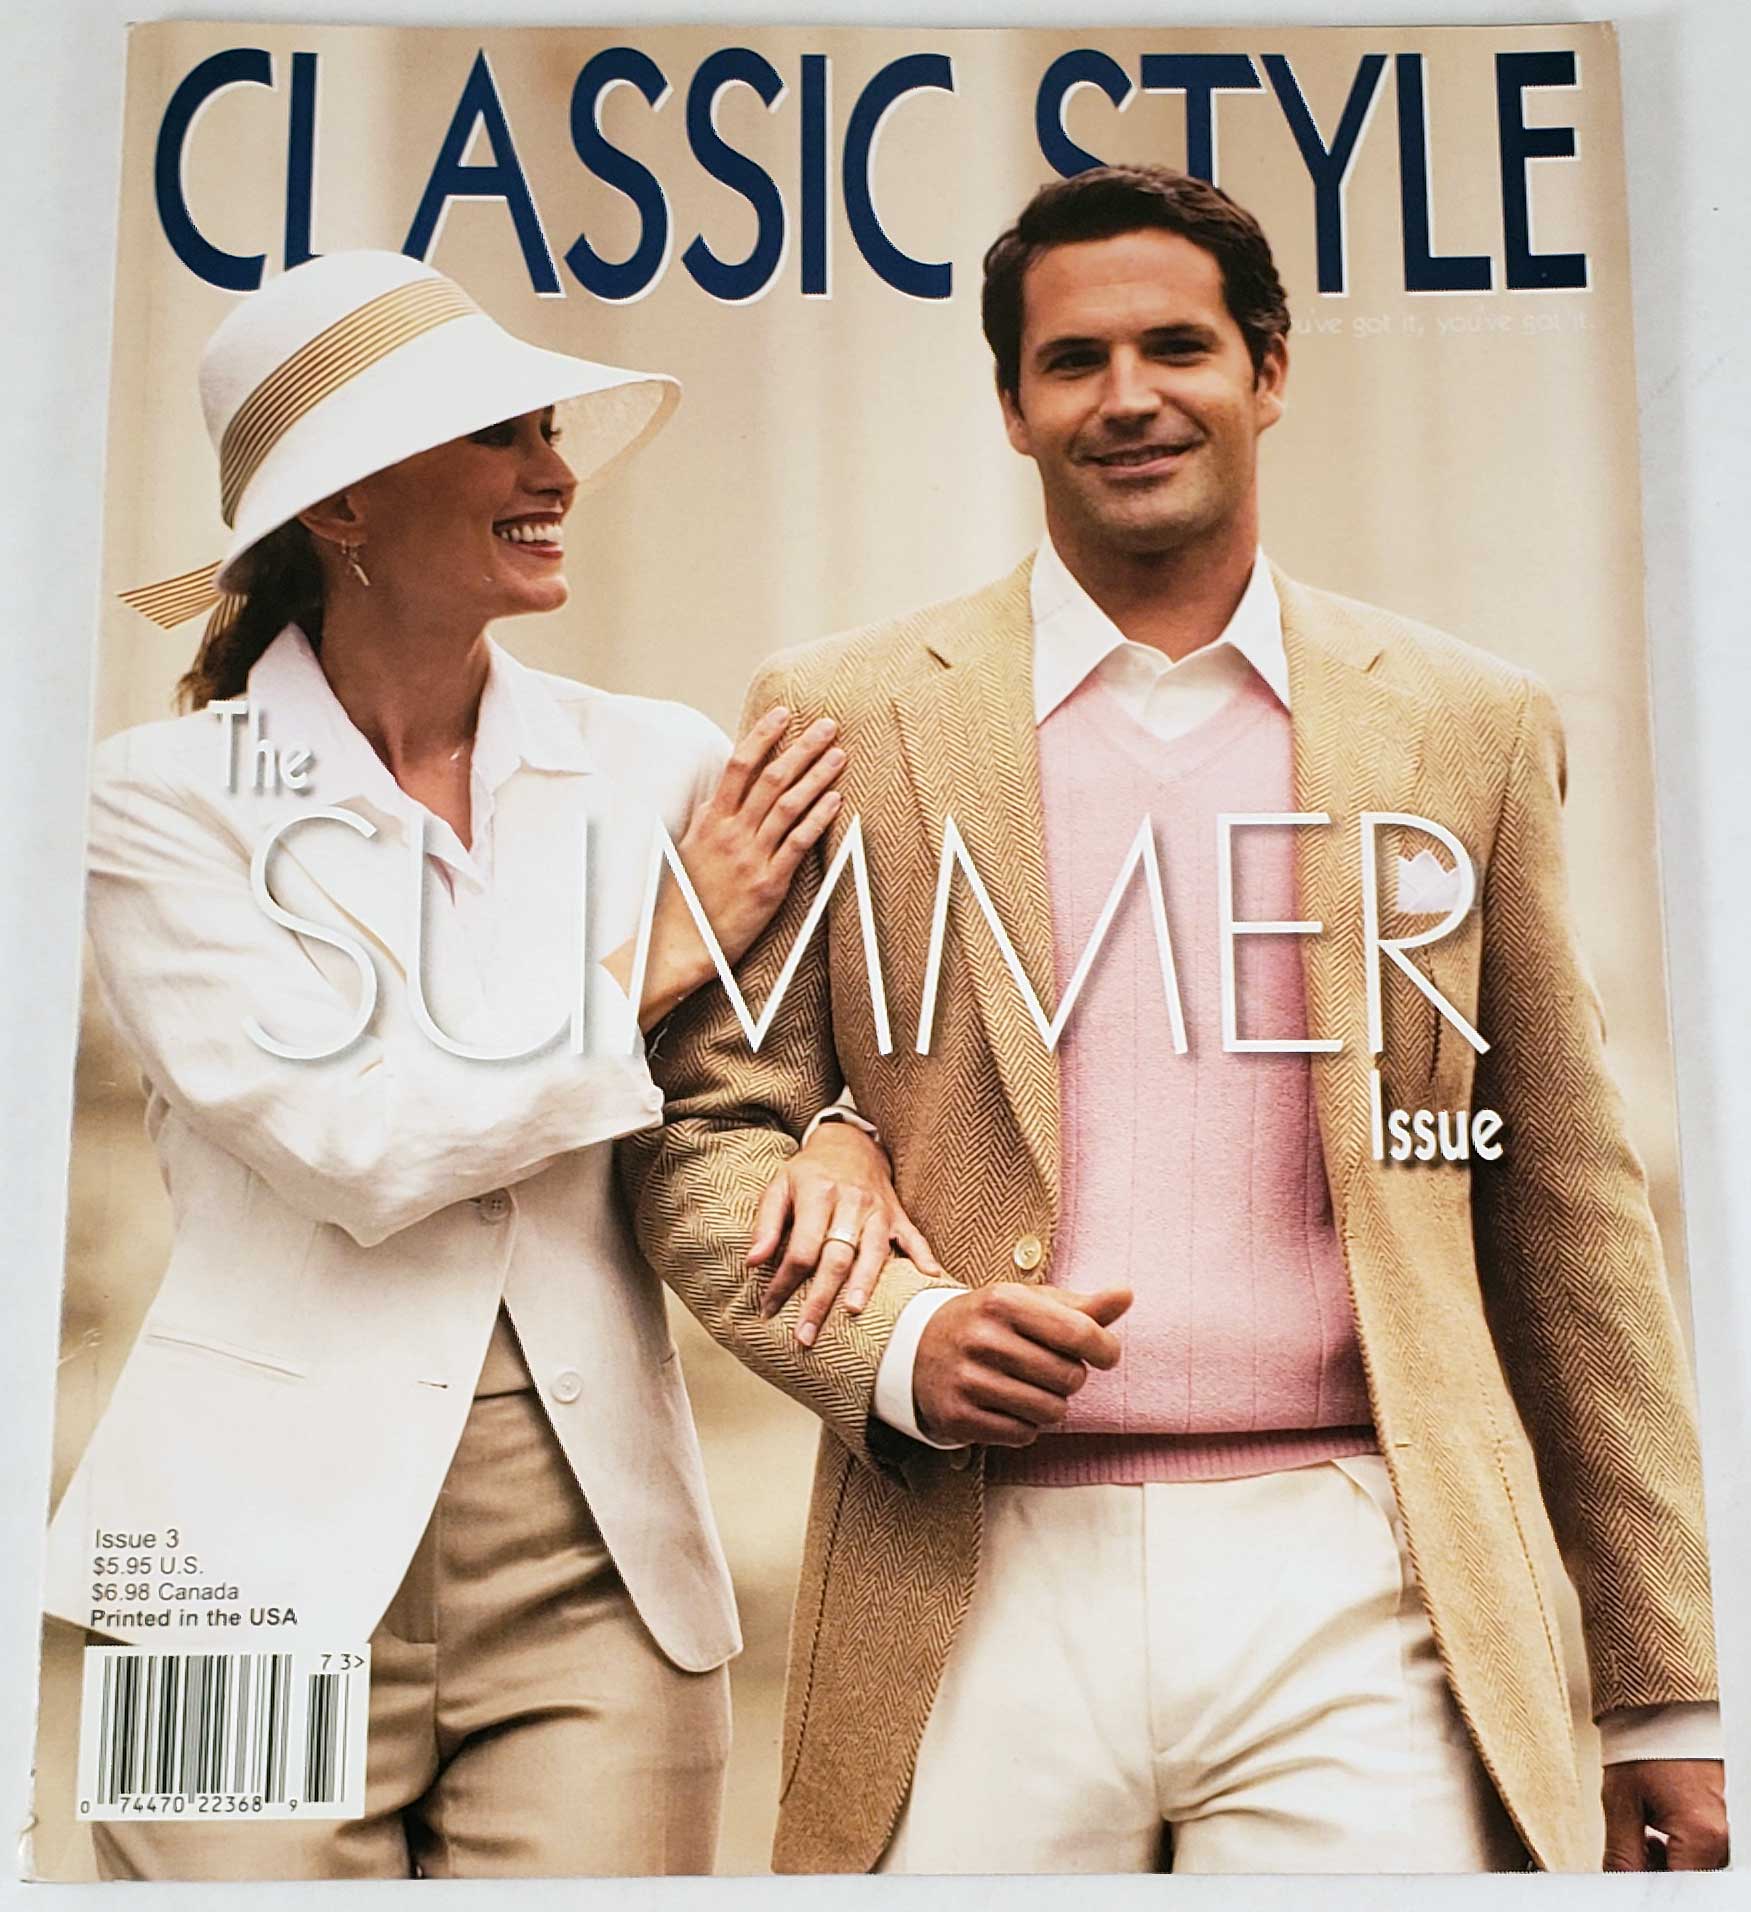 Classic Style Issue 3